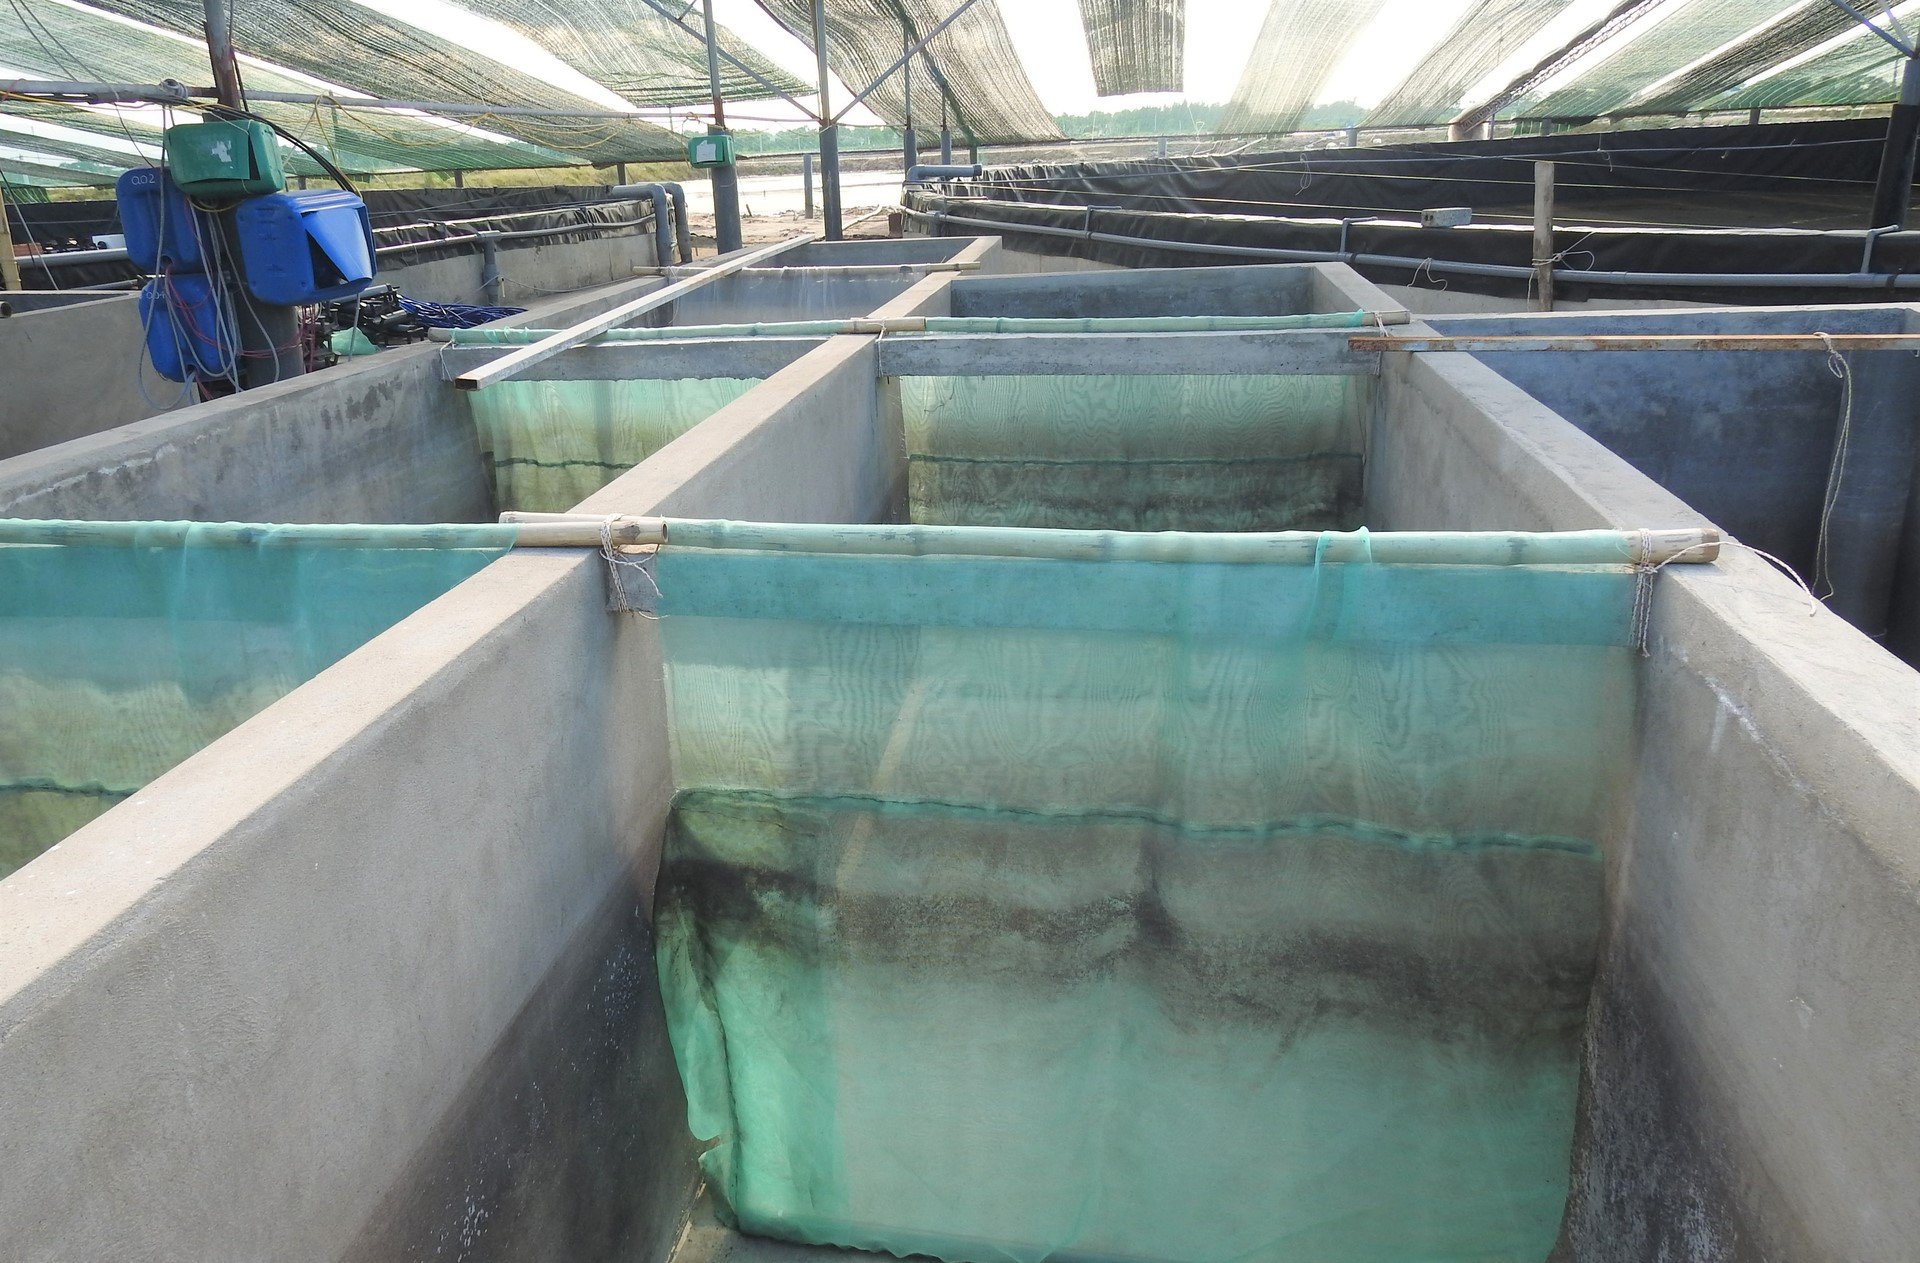 The pond system and water settling tanks are methodically invested in by farmers. Photo: Thanh Nga.